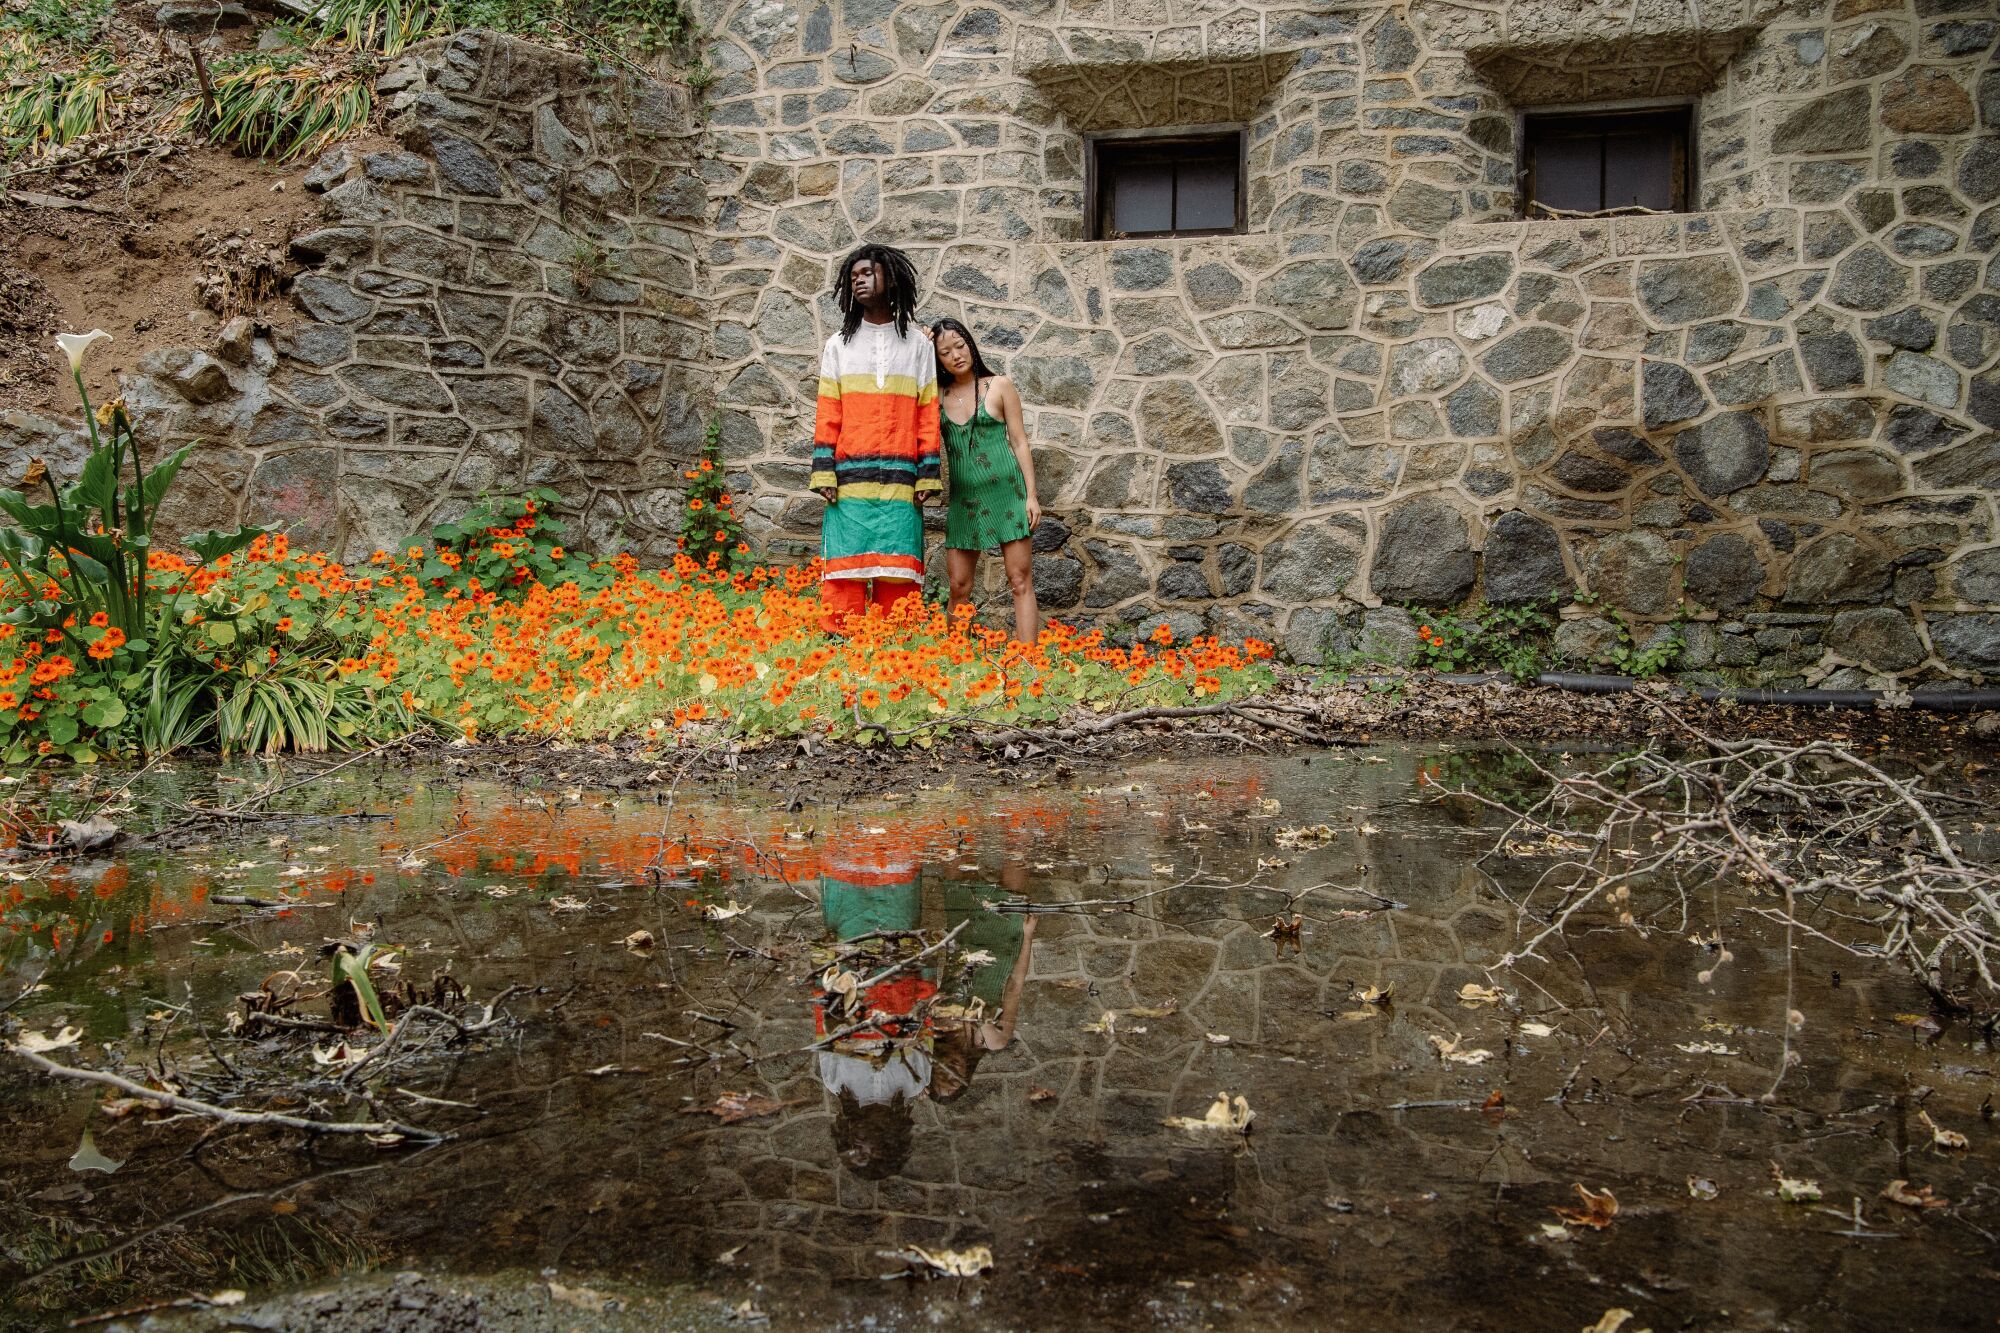 models pose in front of a stone structure among orange flowers with a swamp in front of them